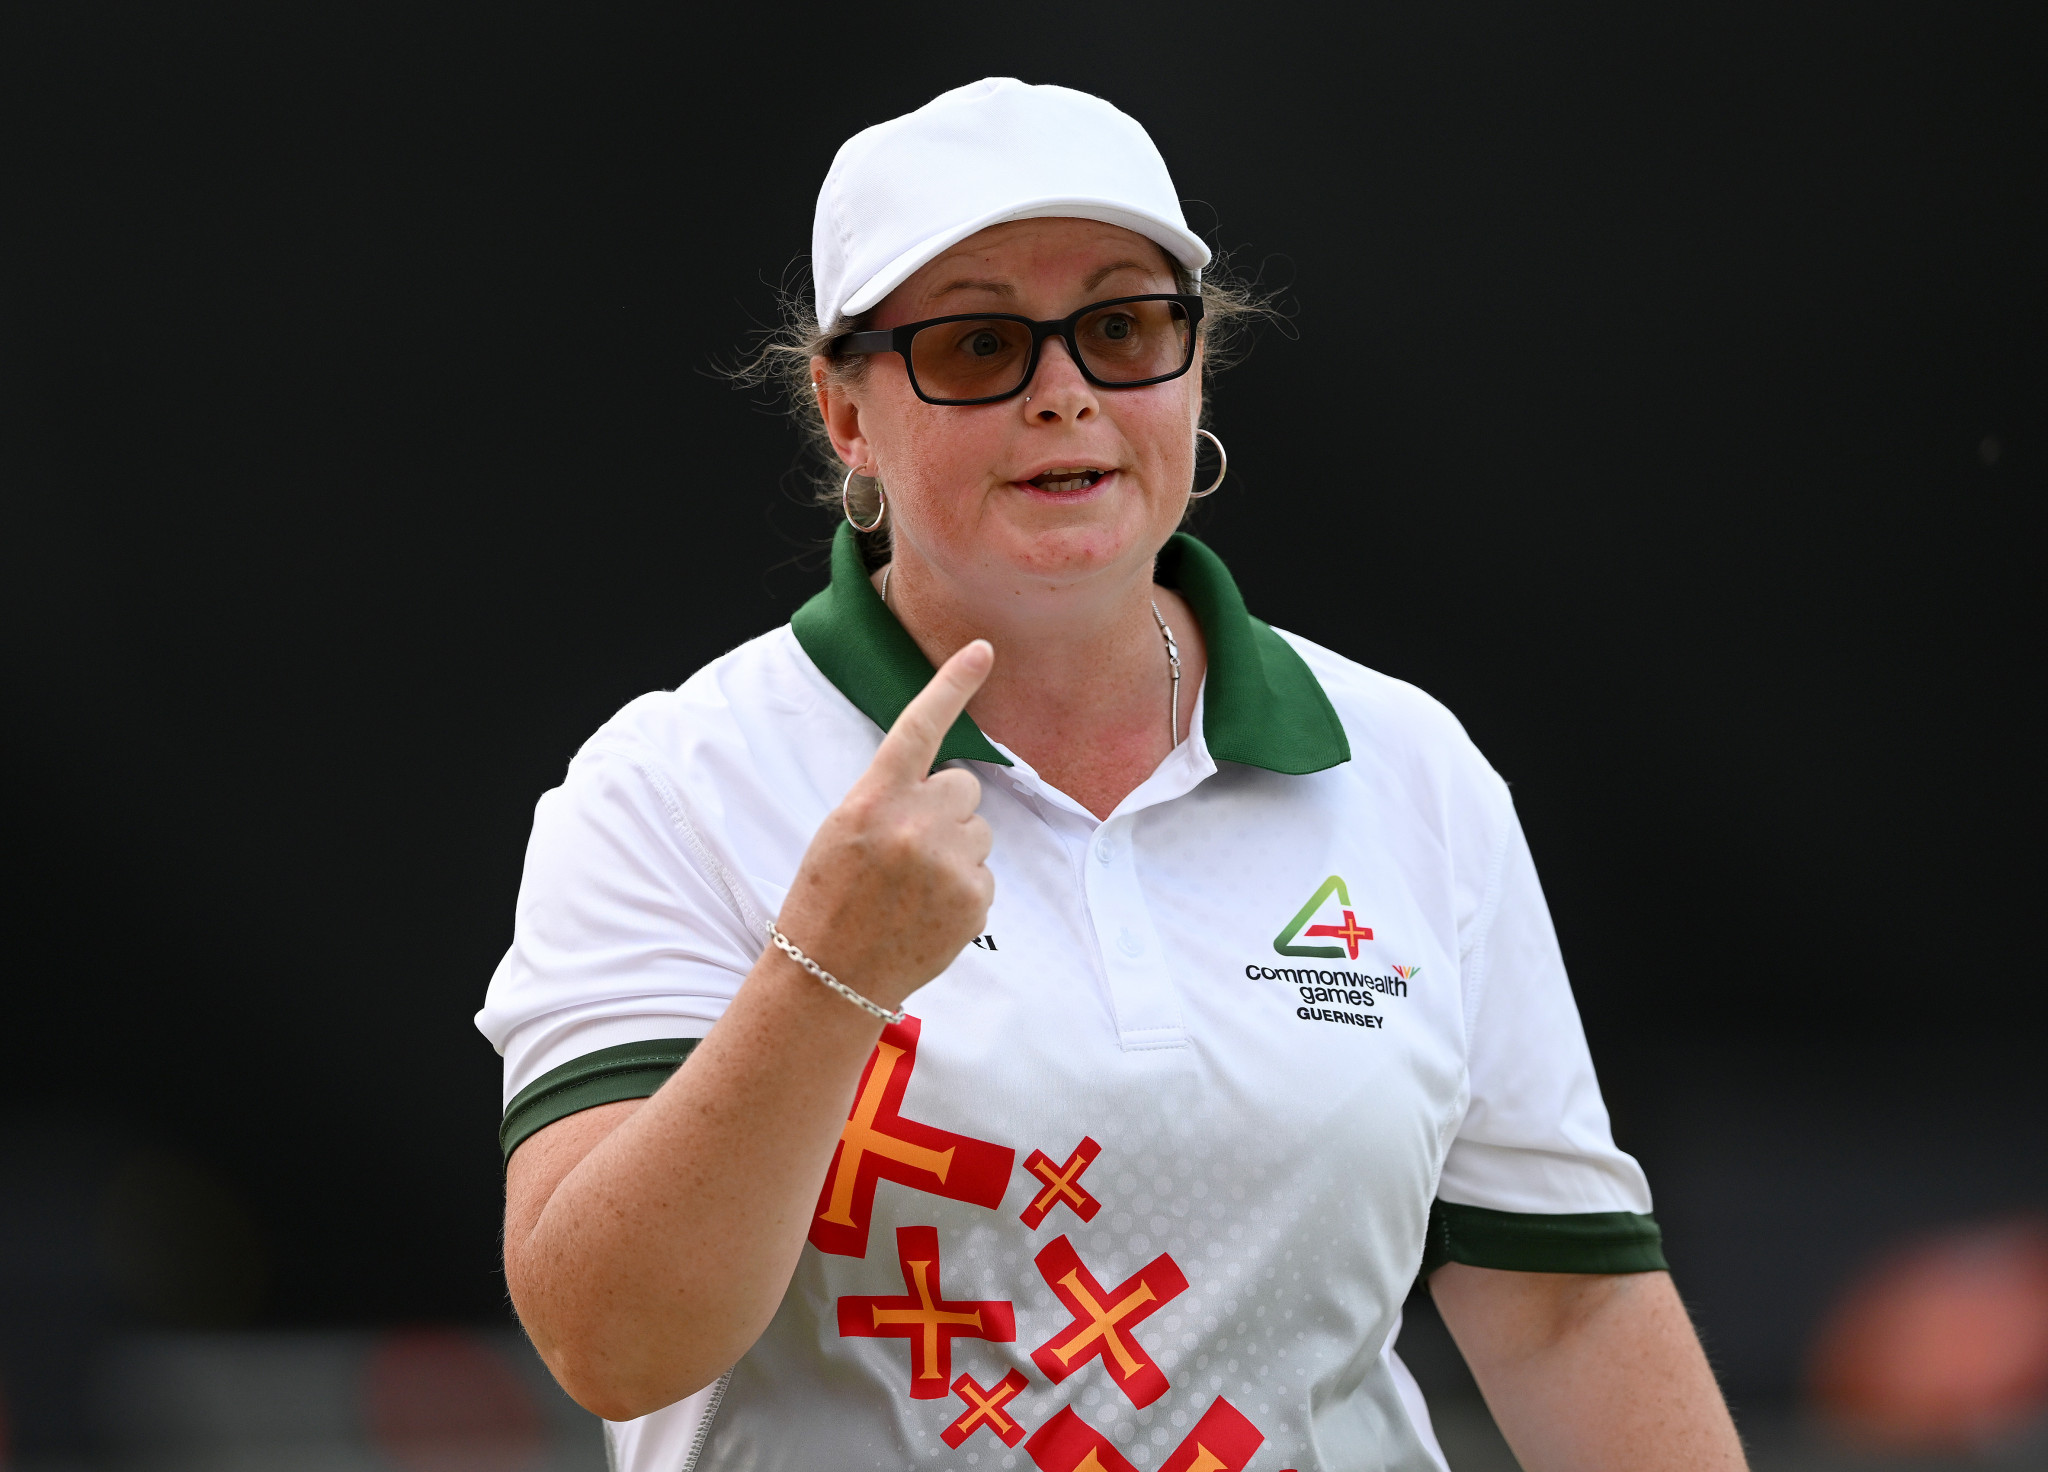 Bowler Lucy Beere won Guernsey's first Commonwealth Games medal since 1994 at the Birmingham 2022 edition ©Getty Images